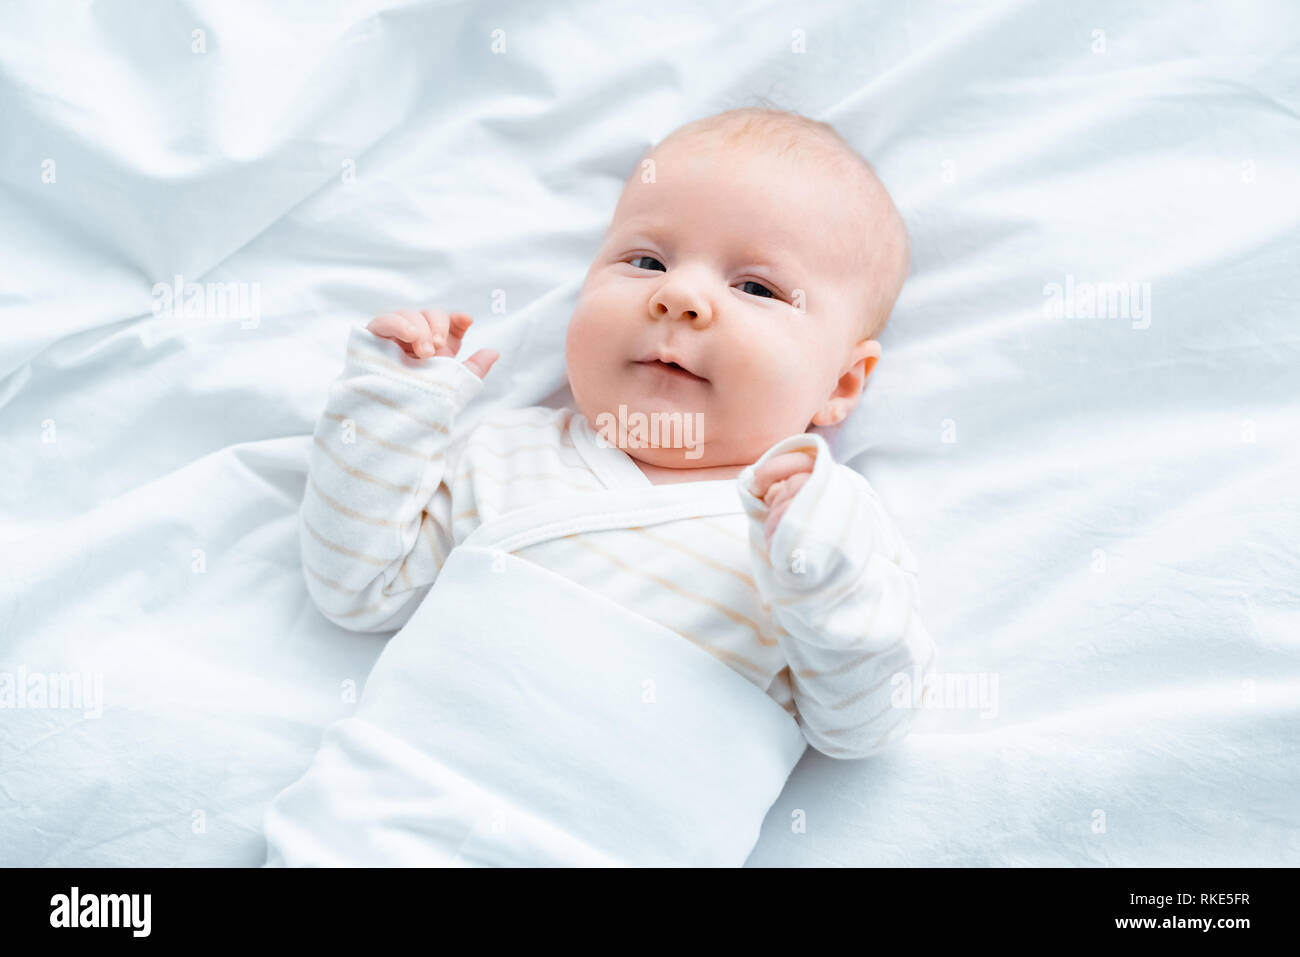 top view of adorable baby looking at camera while lying on white bedding Stock Photo